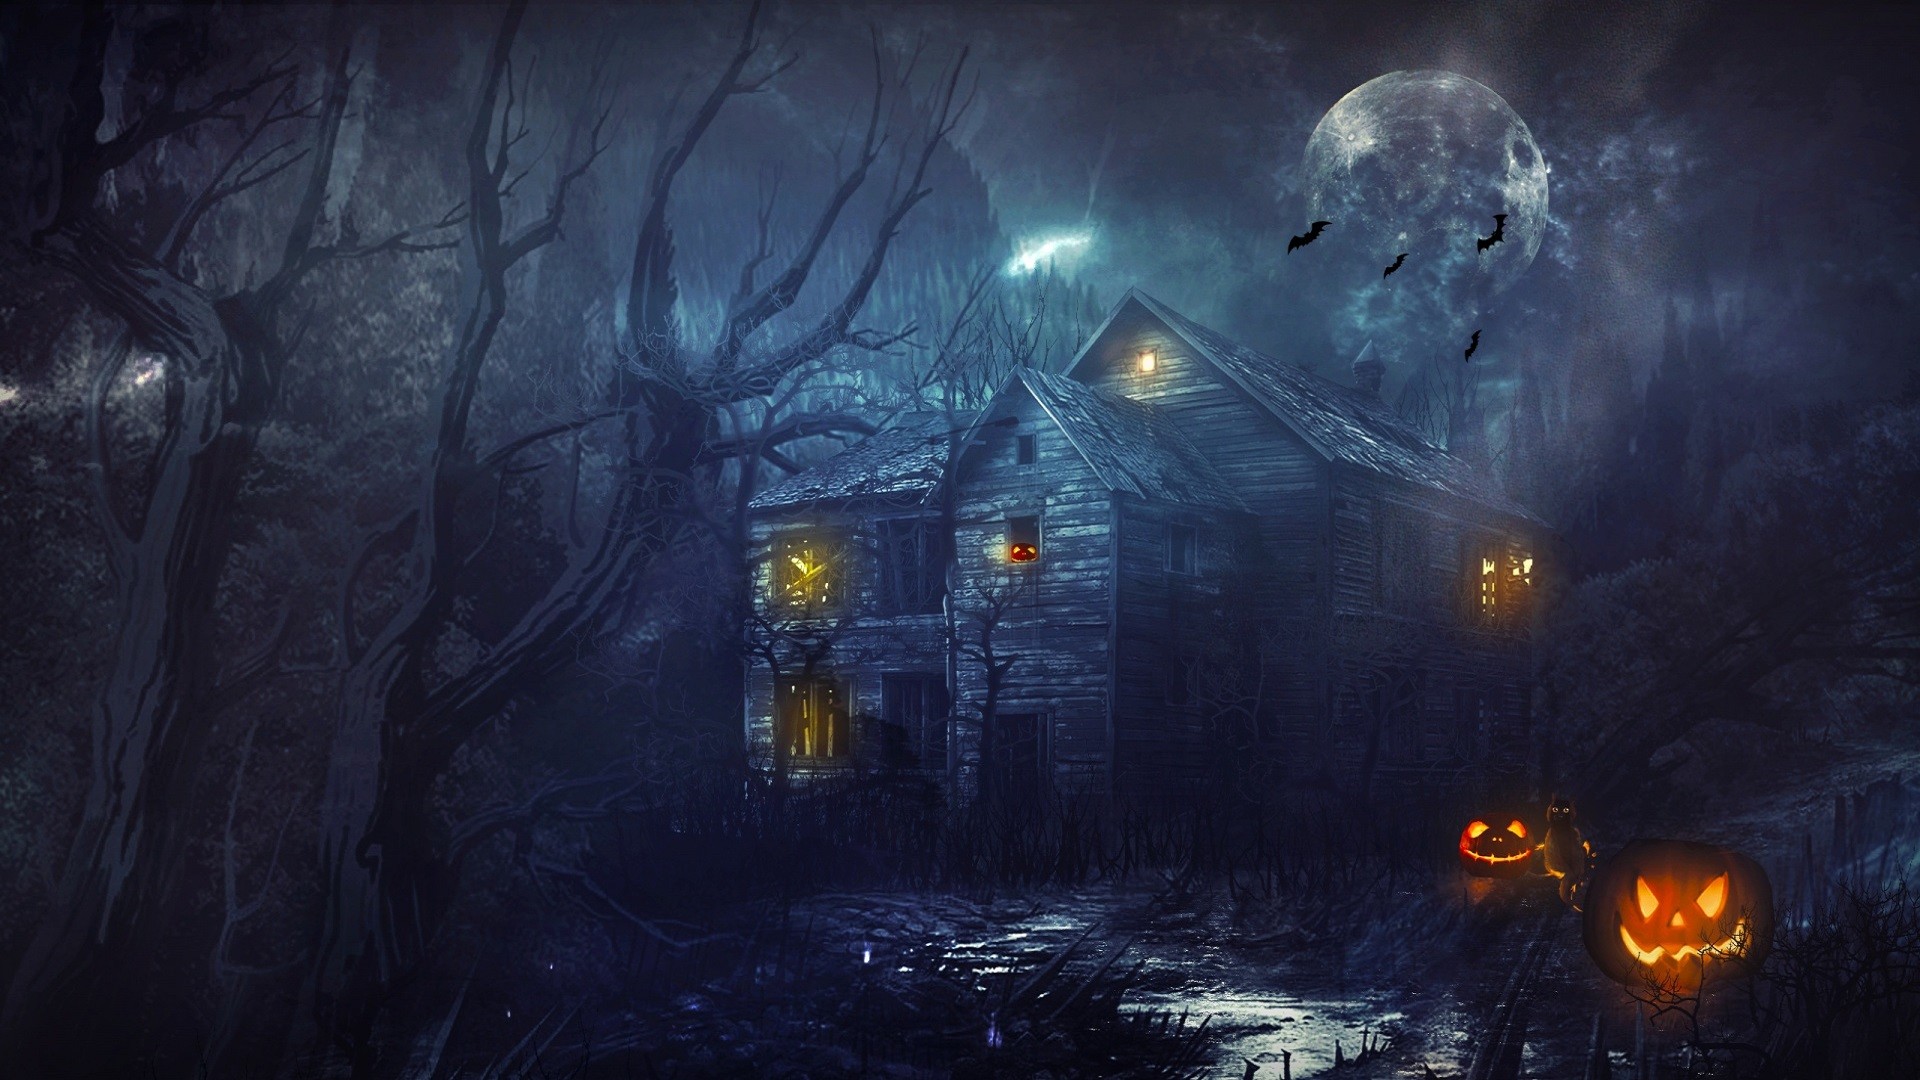 1920x1080 Scary Animated Wallpaper - wallpaper hd. Scary Animated Wallpaper Wallpaper  Hd. Free Halloween Backgrounds ...